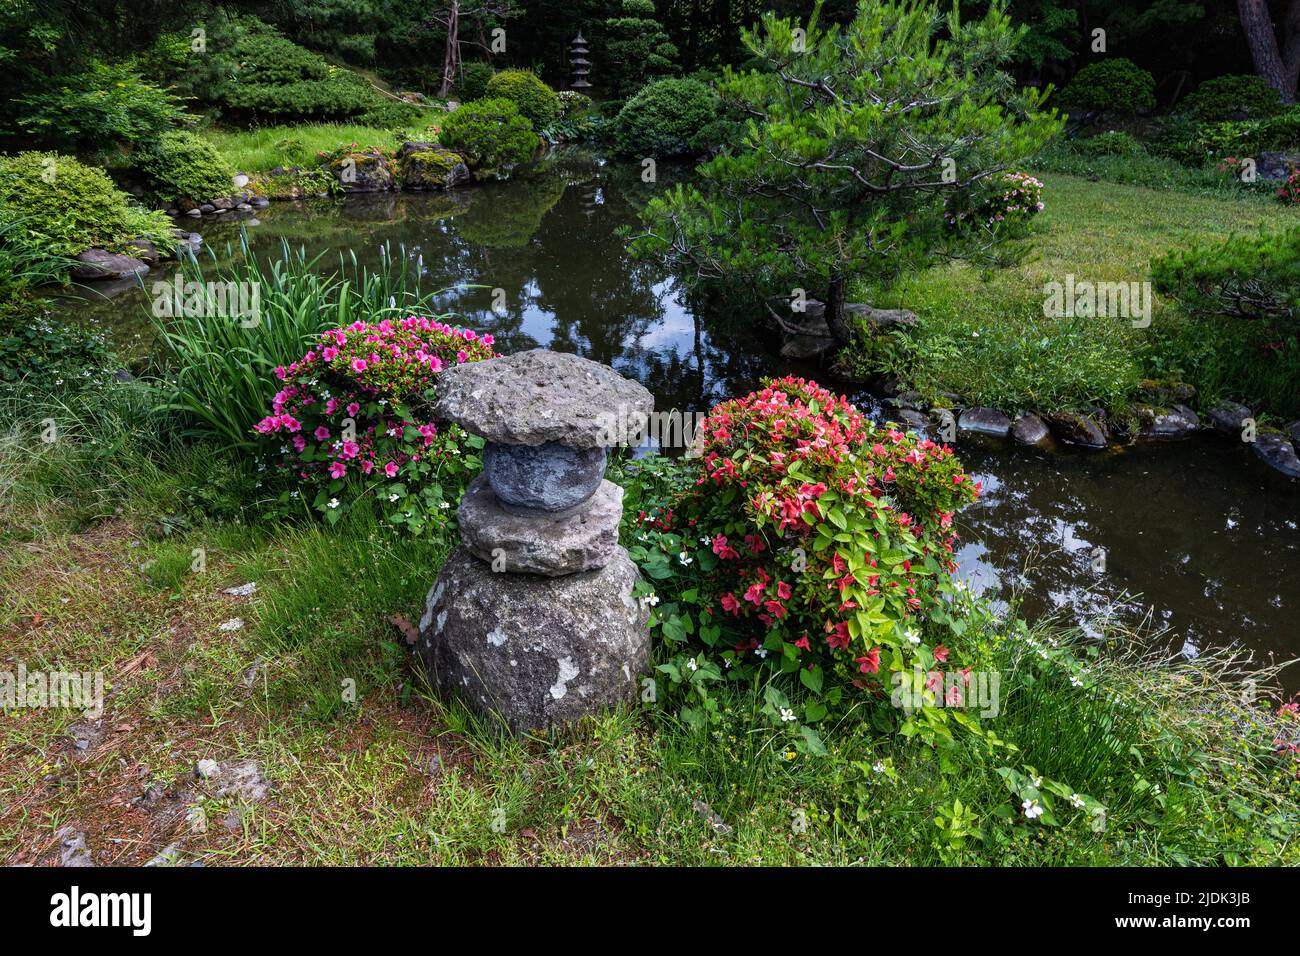 Kagetsutei Garden Museum - the Japanese garden that opened in 2018 after renovation of the sake brewery Nabe Sanhonten formerly owned by the Hoshino f Stock Photo